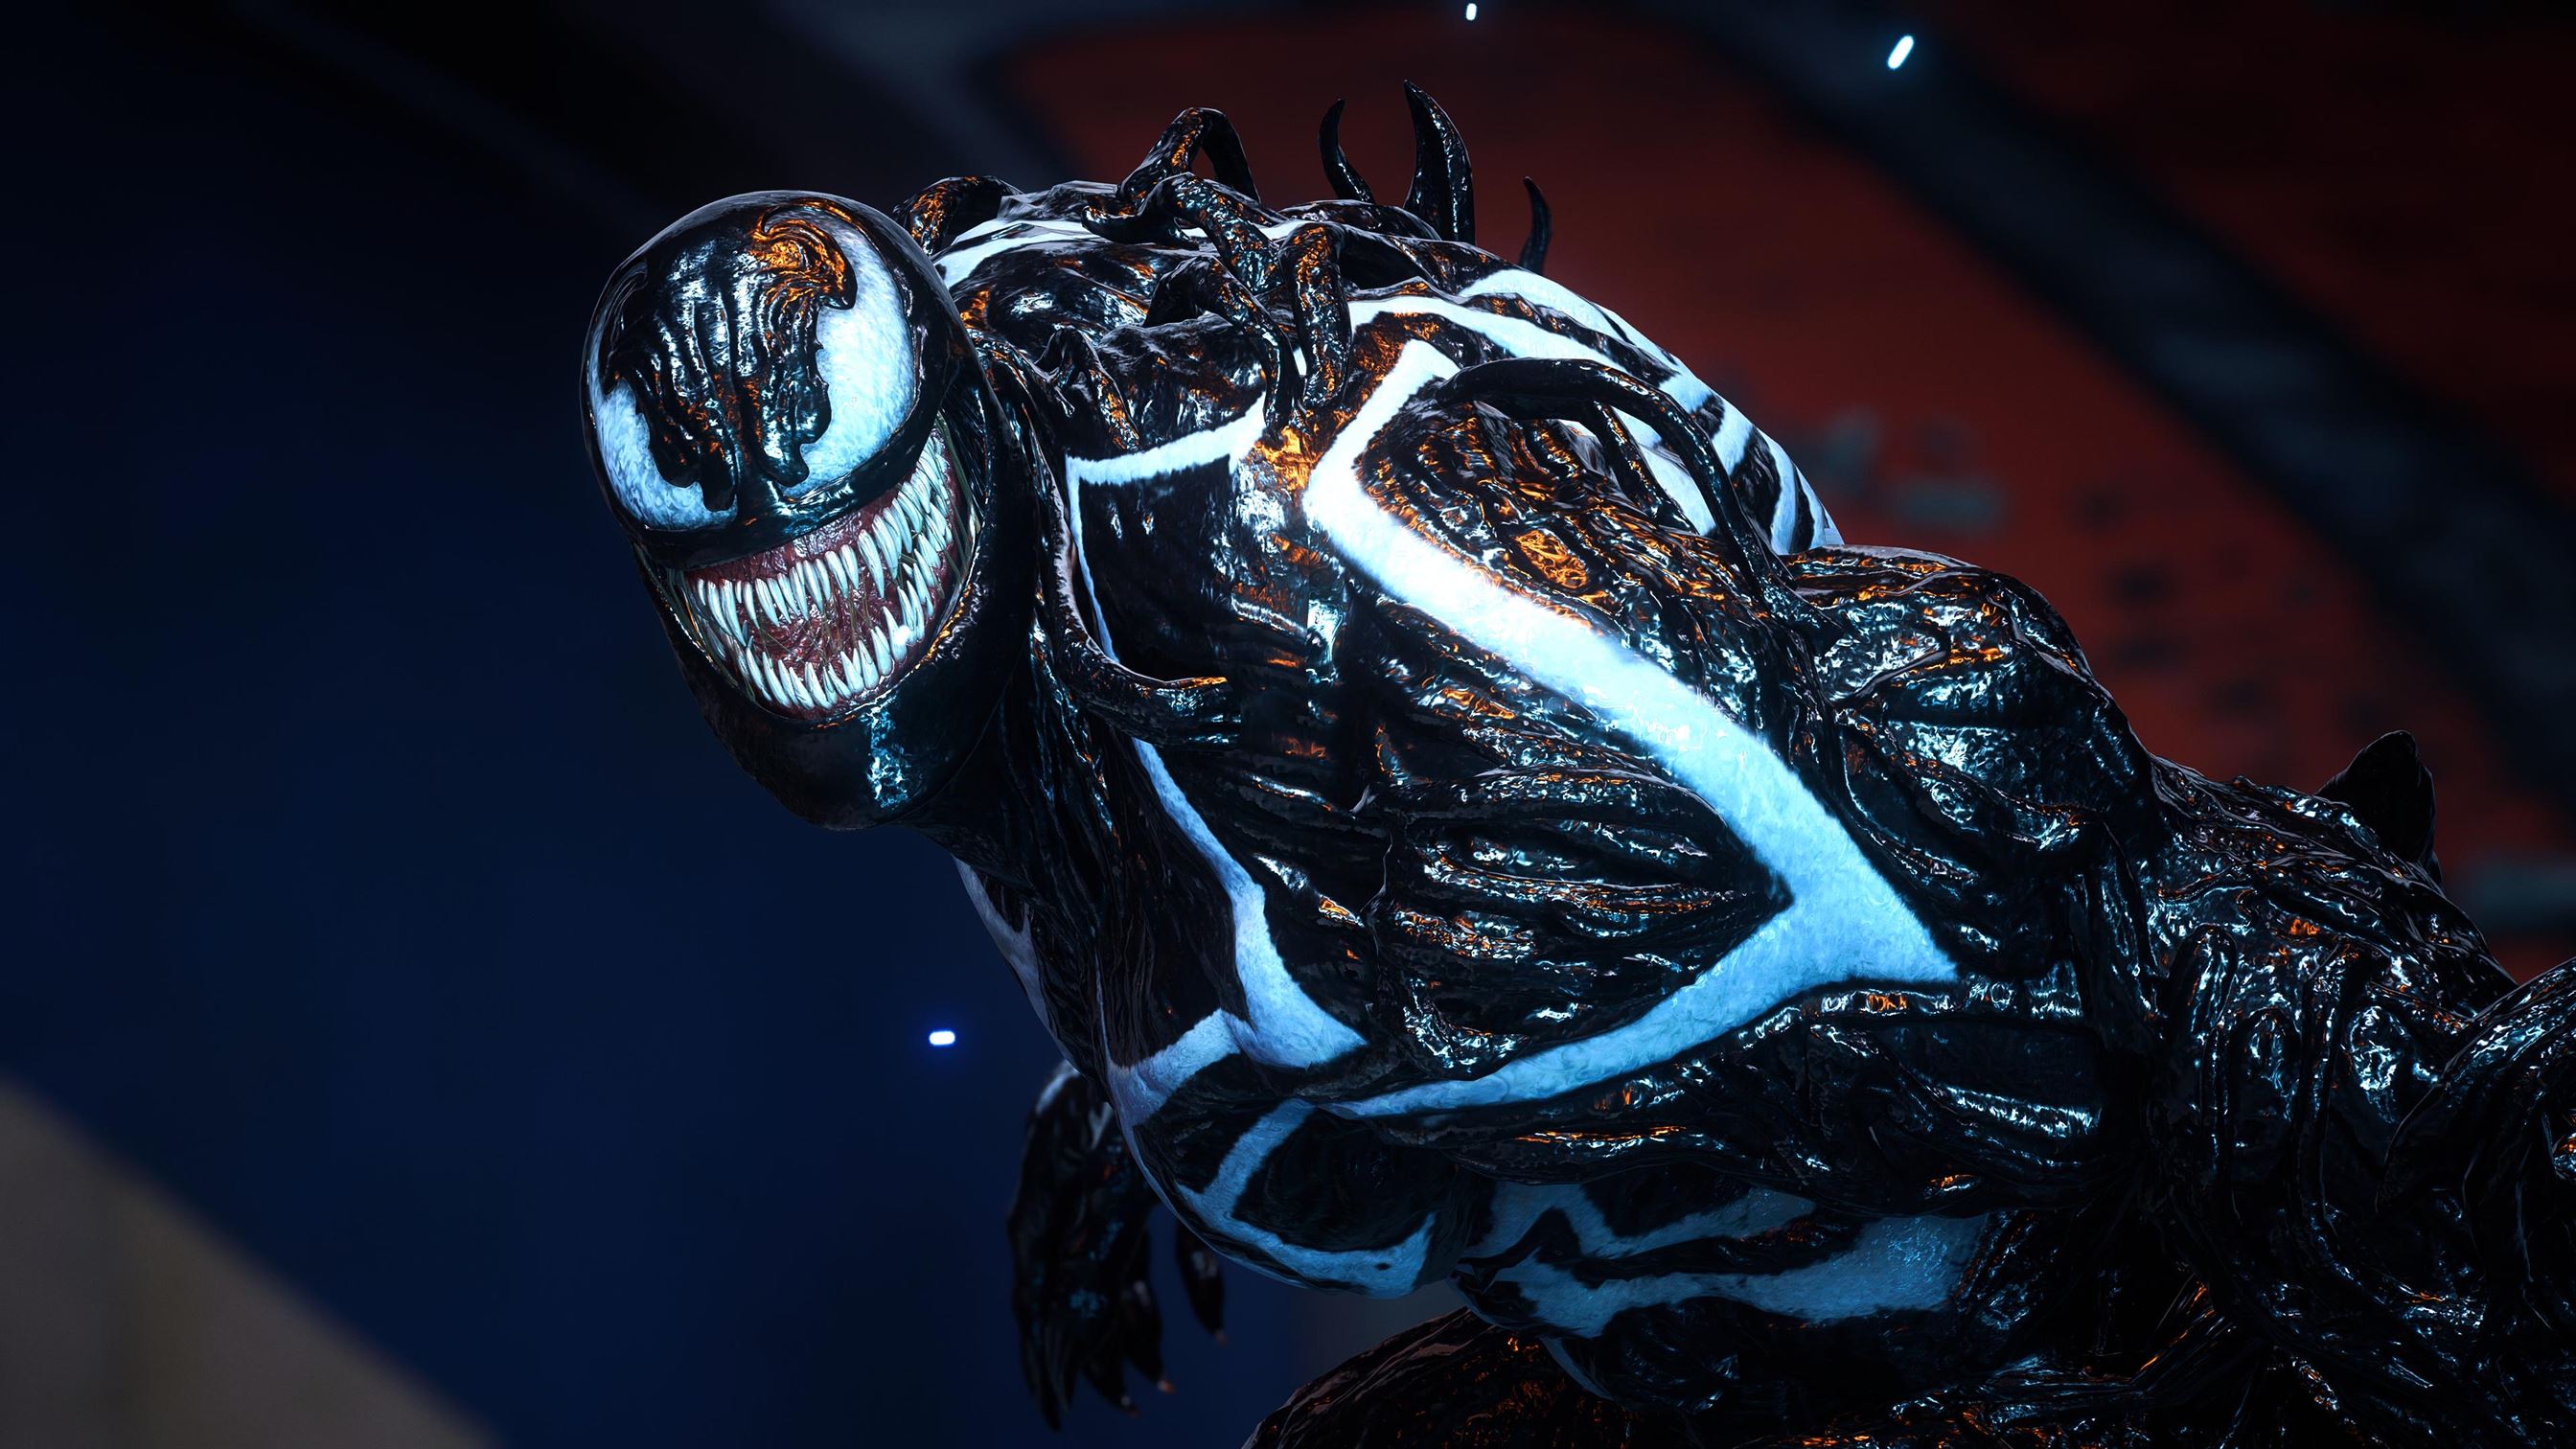 Venom, while formidable, is thinly written. Photo courtesy of Insomniac Games